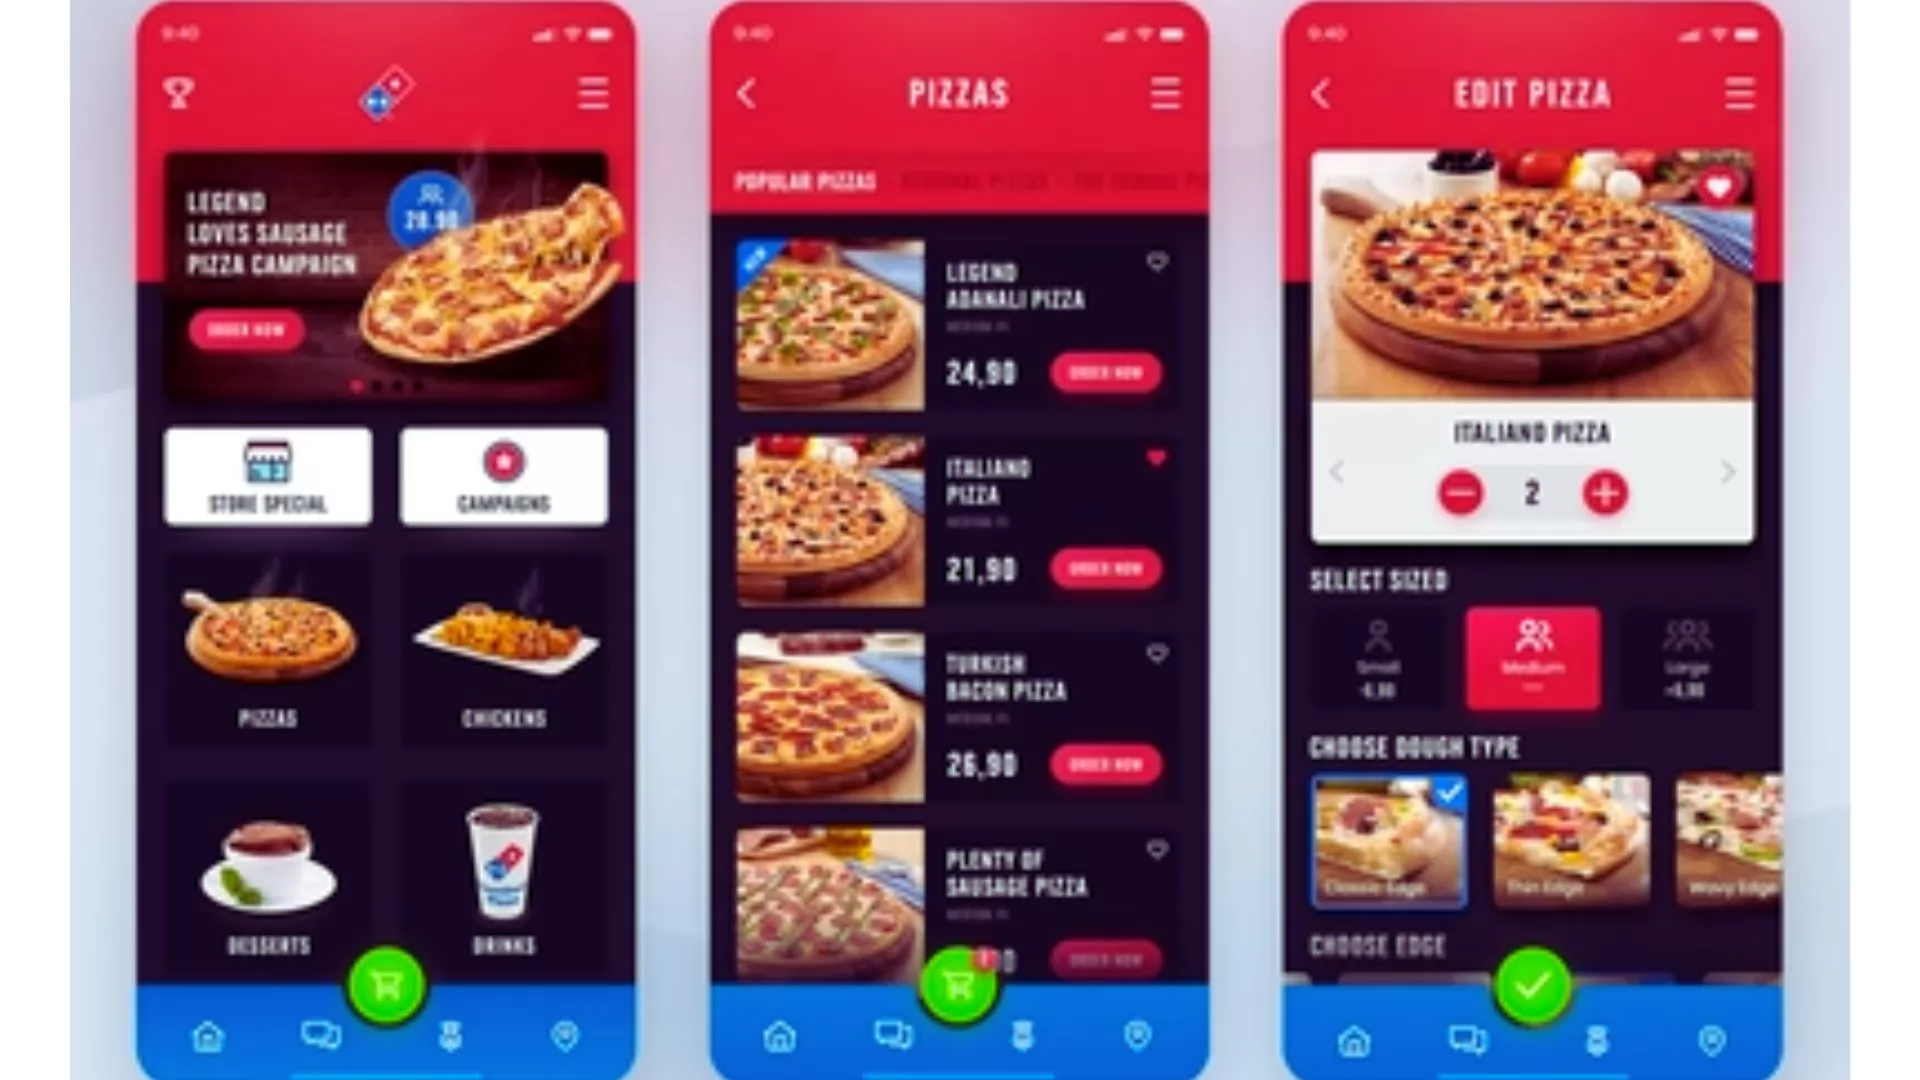 How To Order Domino's Pizza In Train Using Domino's App